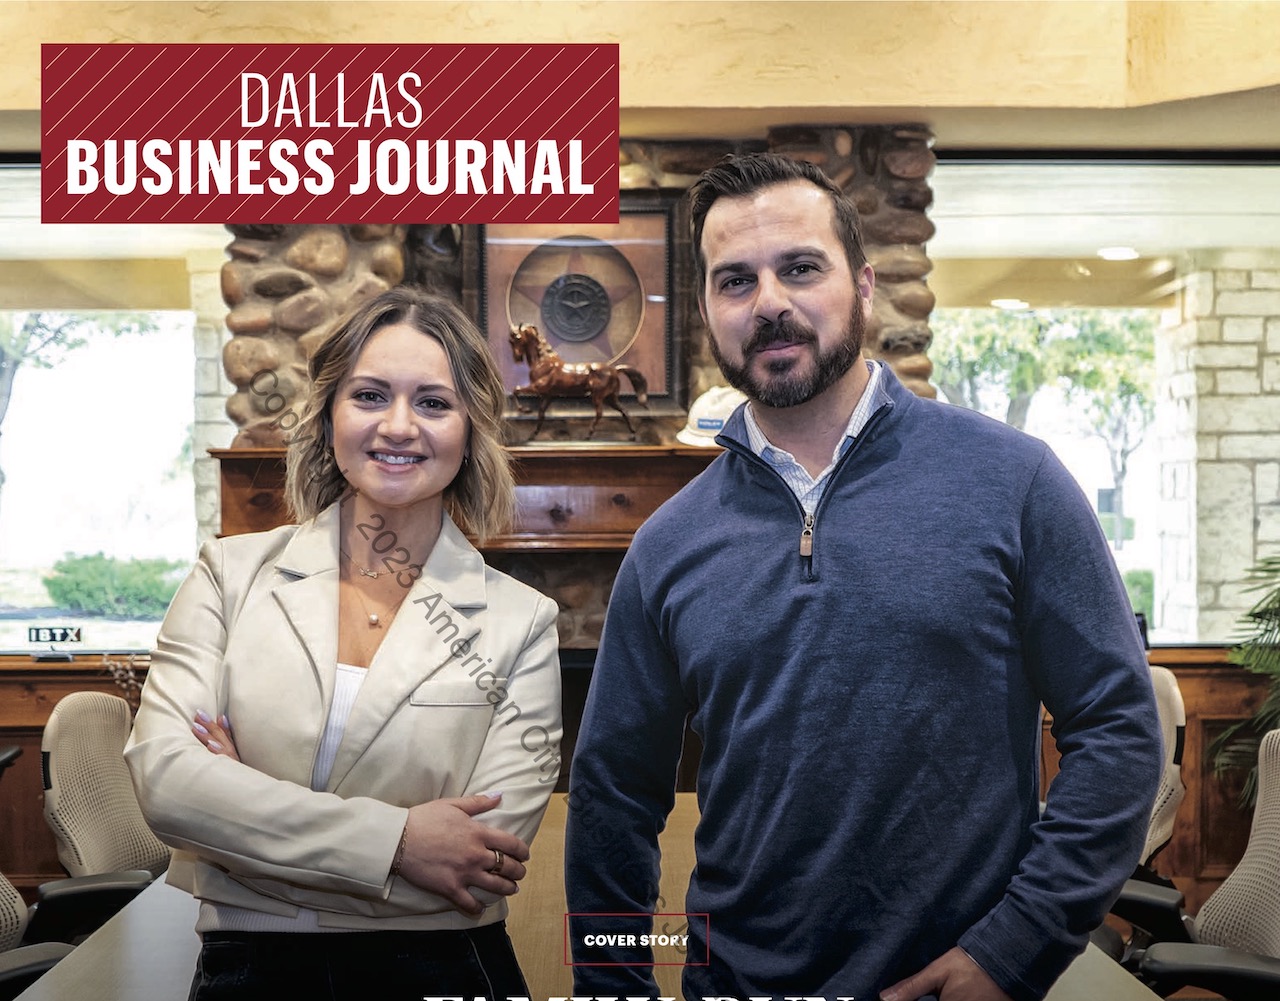 Dallas Business Journal Cover Story on Kinley Construction: Family-Run Fast Growth